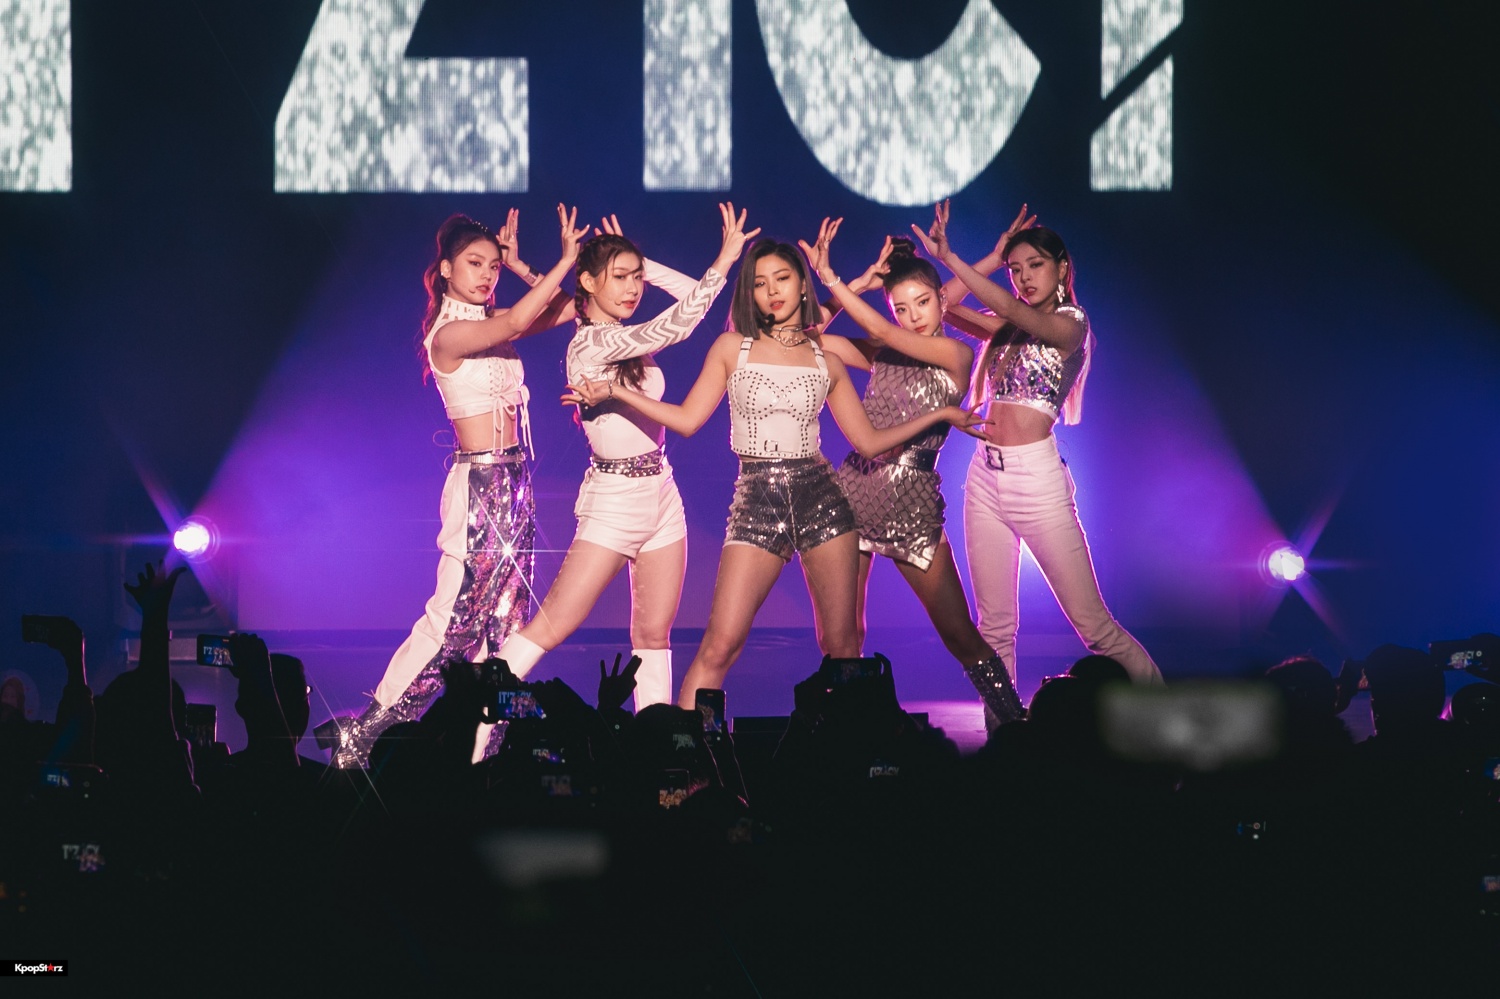 ITZY’s PREMIERE SHOWCASE TOUR “ITZY? ITZY!” Concludes in New York – EXCLUSIVE REVIEW